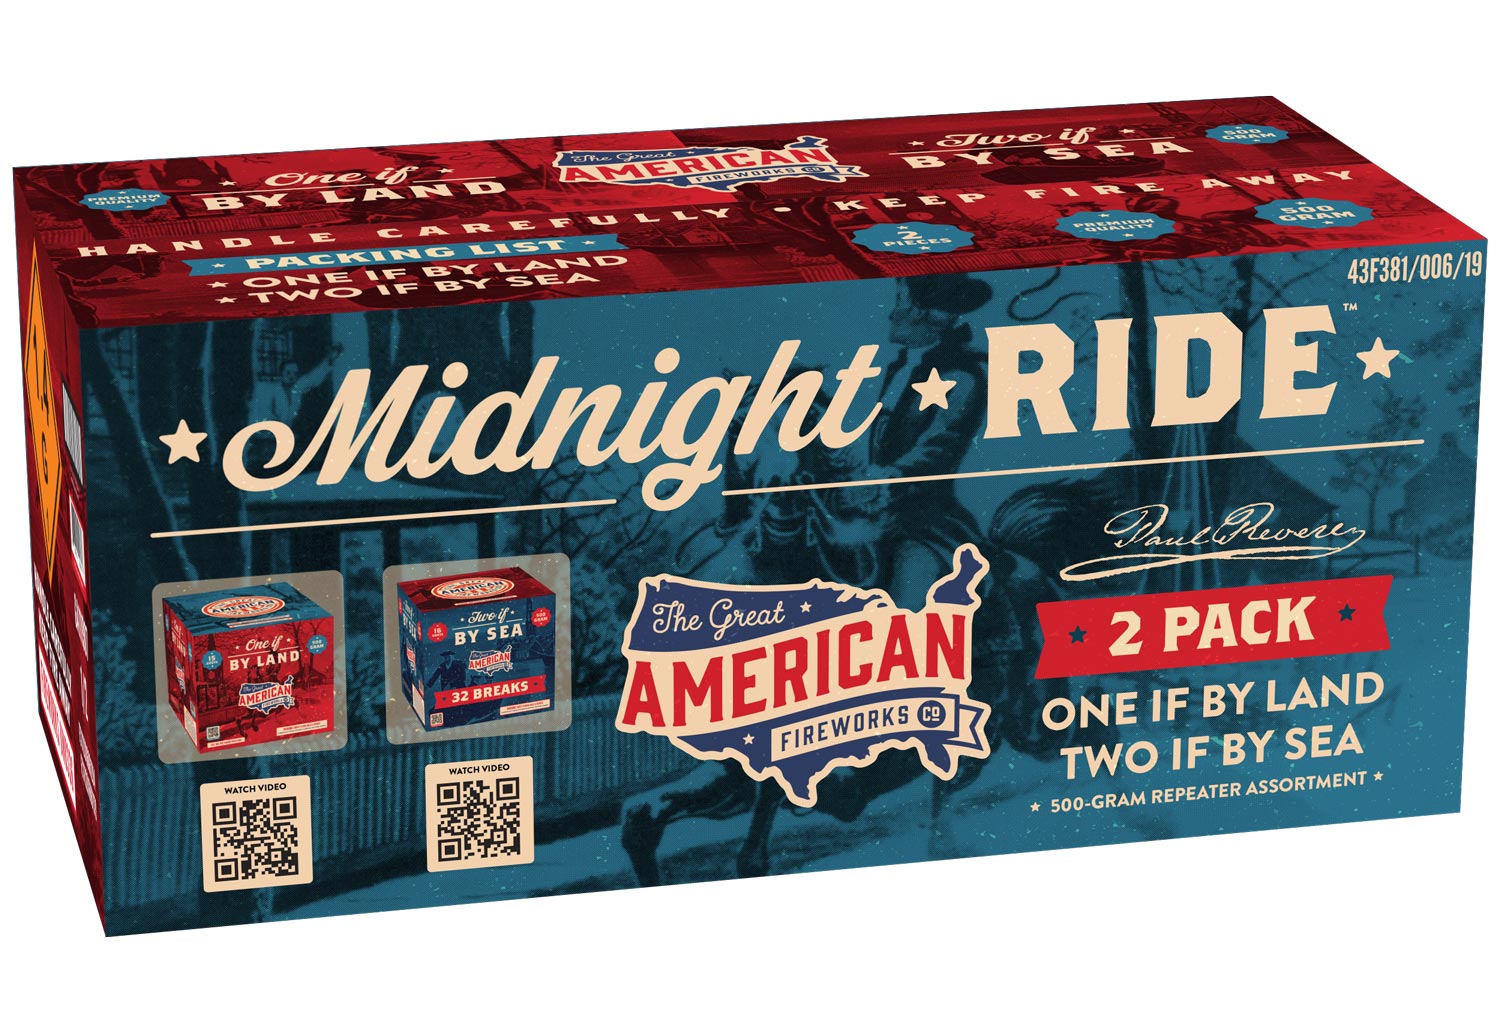 Download 2019 Early Arrival Midnight Ride Superior Fireworks